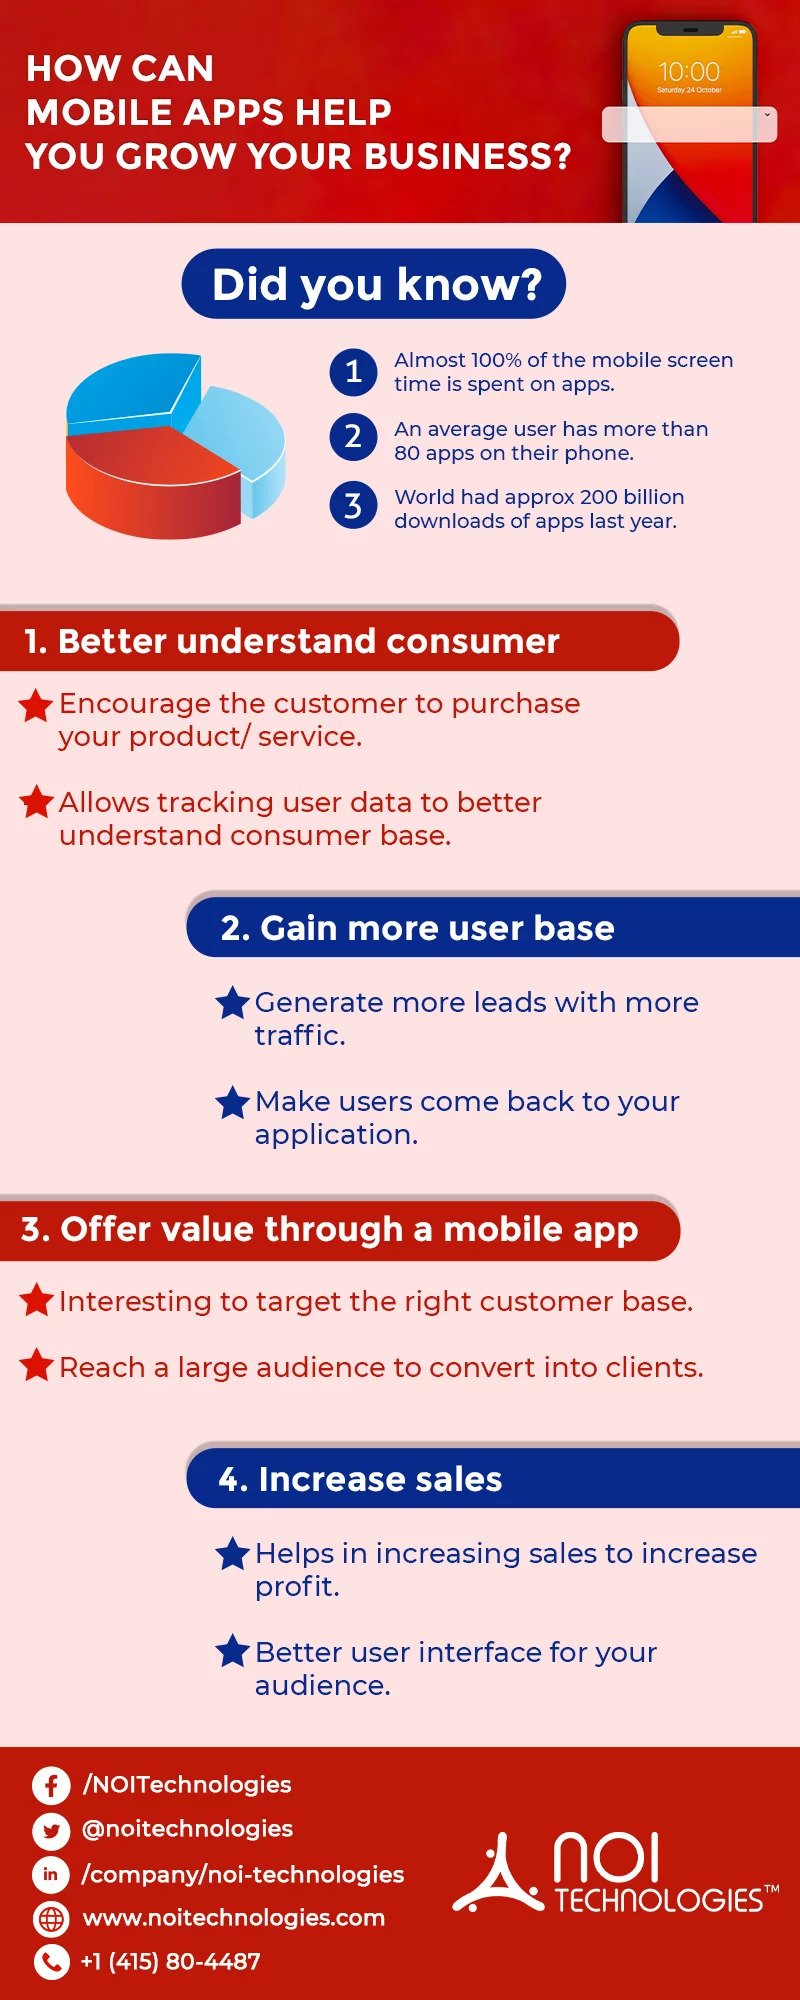 How Can Mobile Apps Help You Grow Your Business?